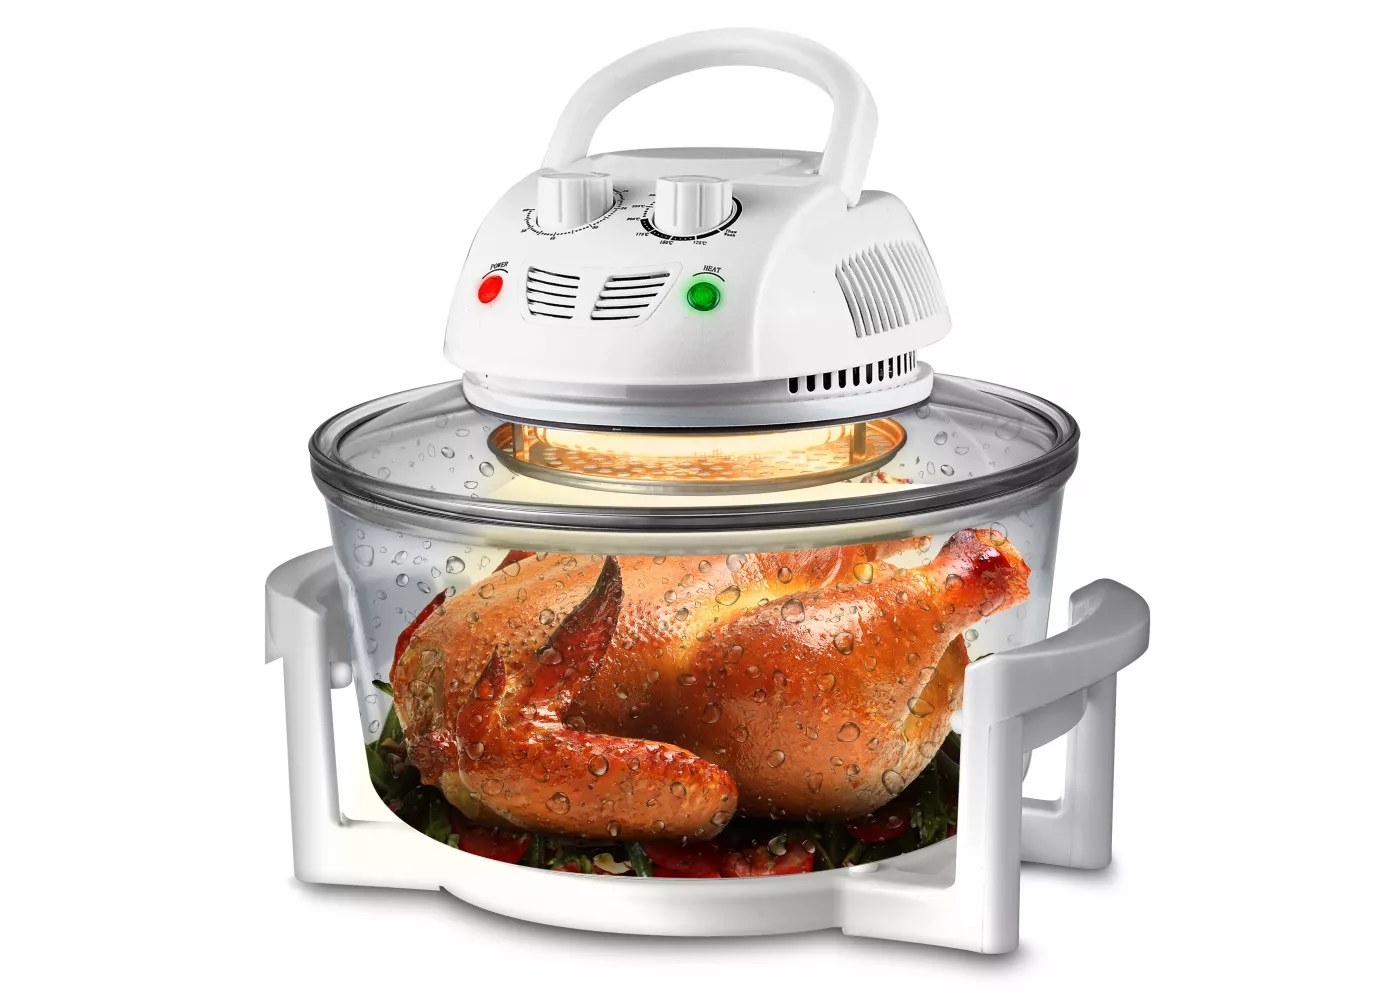 A chicken in an oven air fryer and convection cooker